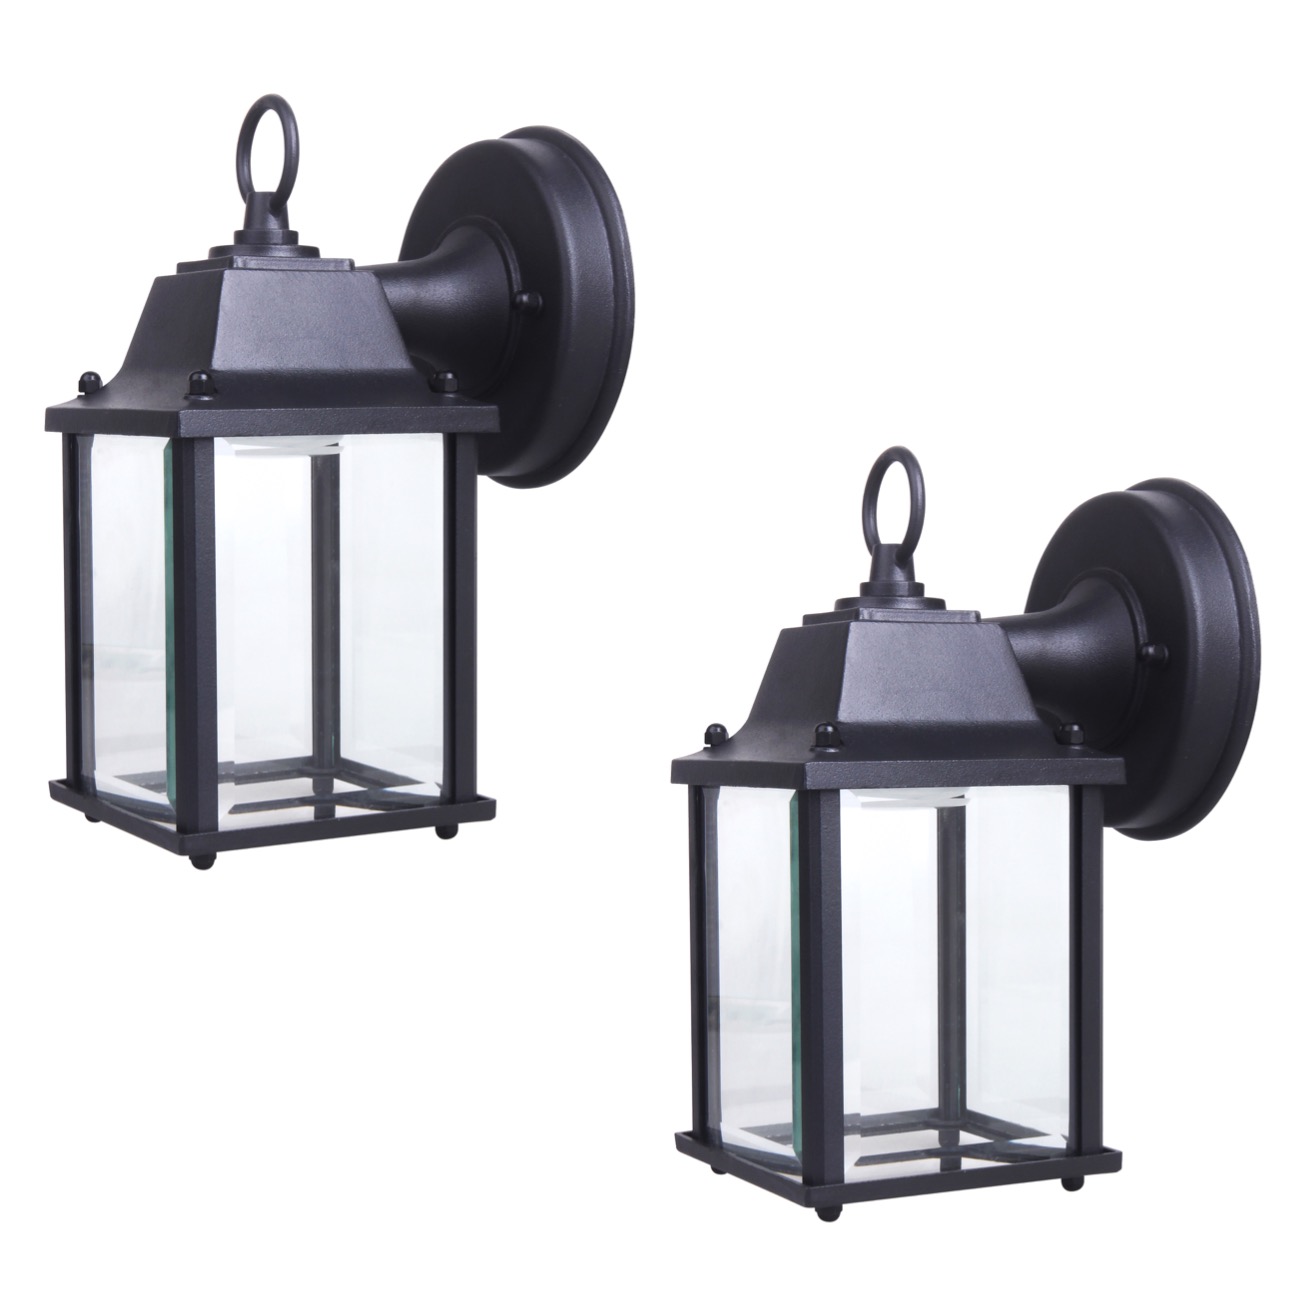 LIT-PaTH Small Outdoor LED Wall Lantern, Wall Sconce as Porch Lighting Fixture, 5000K Daylight White, 9.5W (75W Equivalent), 800 Lumen, Aluminum Housing Plus Glass, Outdoor Rated, 2-Pack